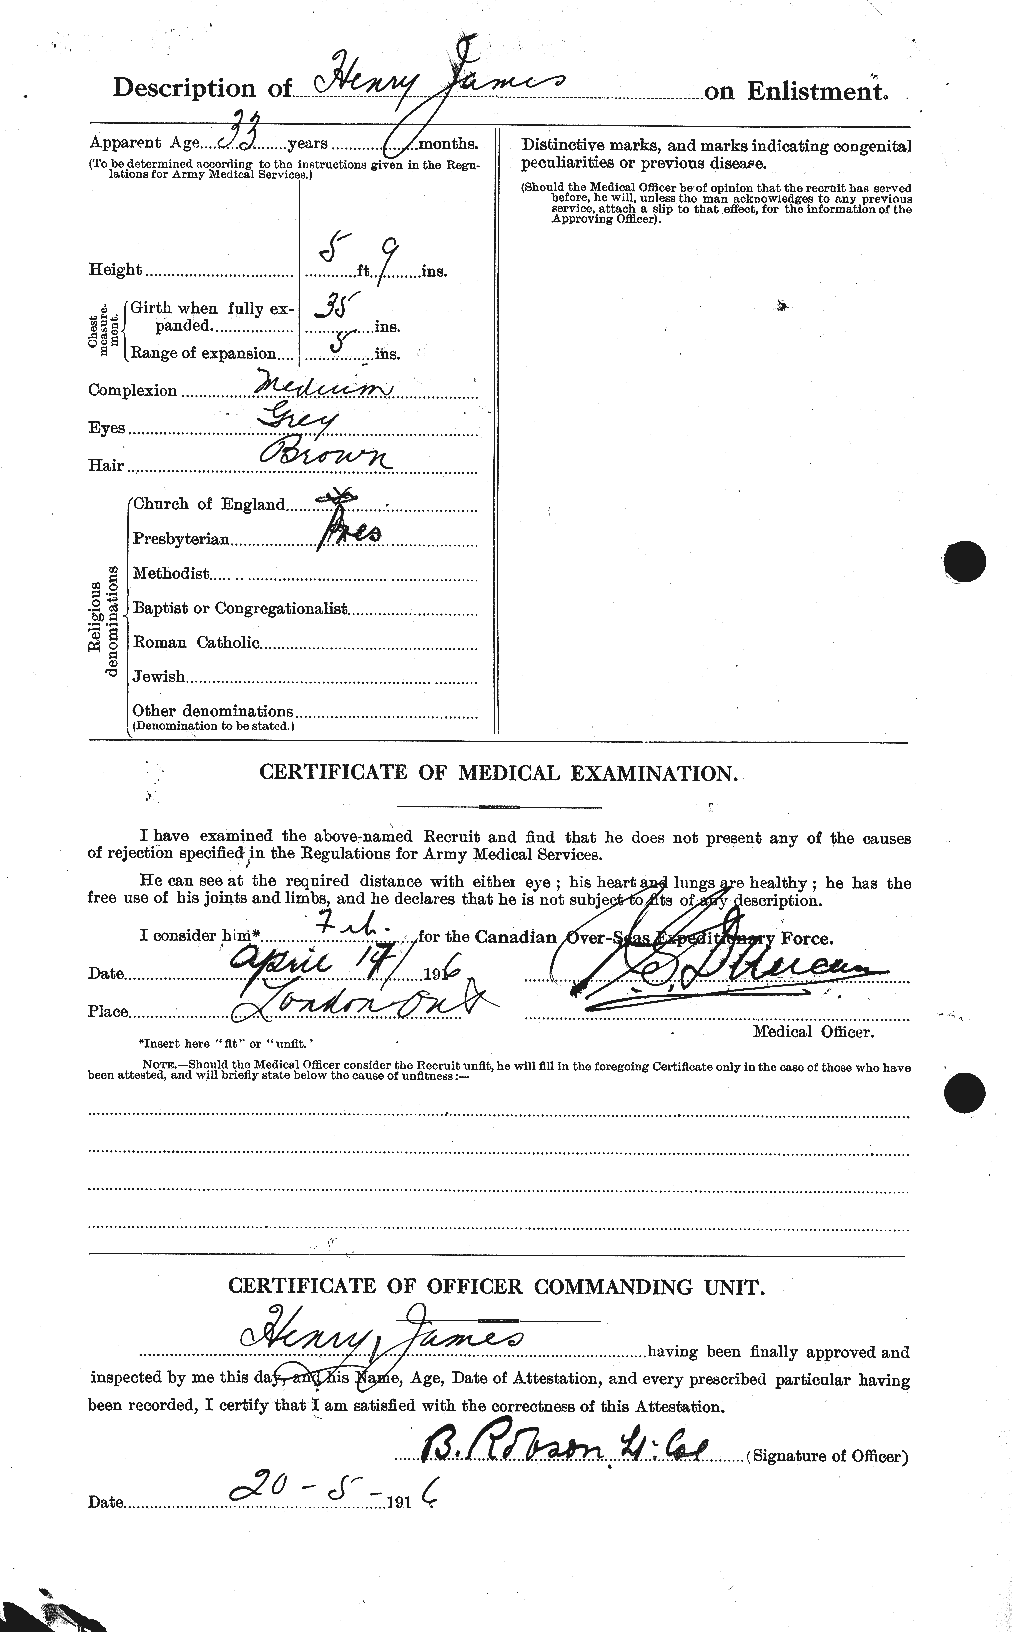 Personnel Records of the First World War - CEF 387587b